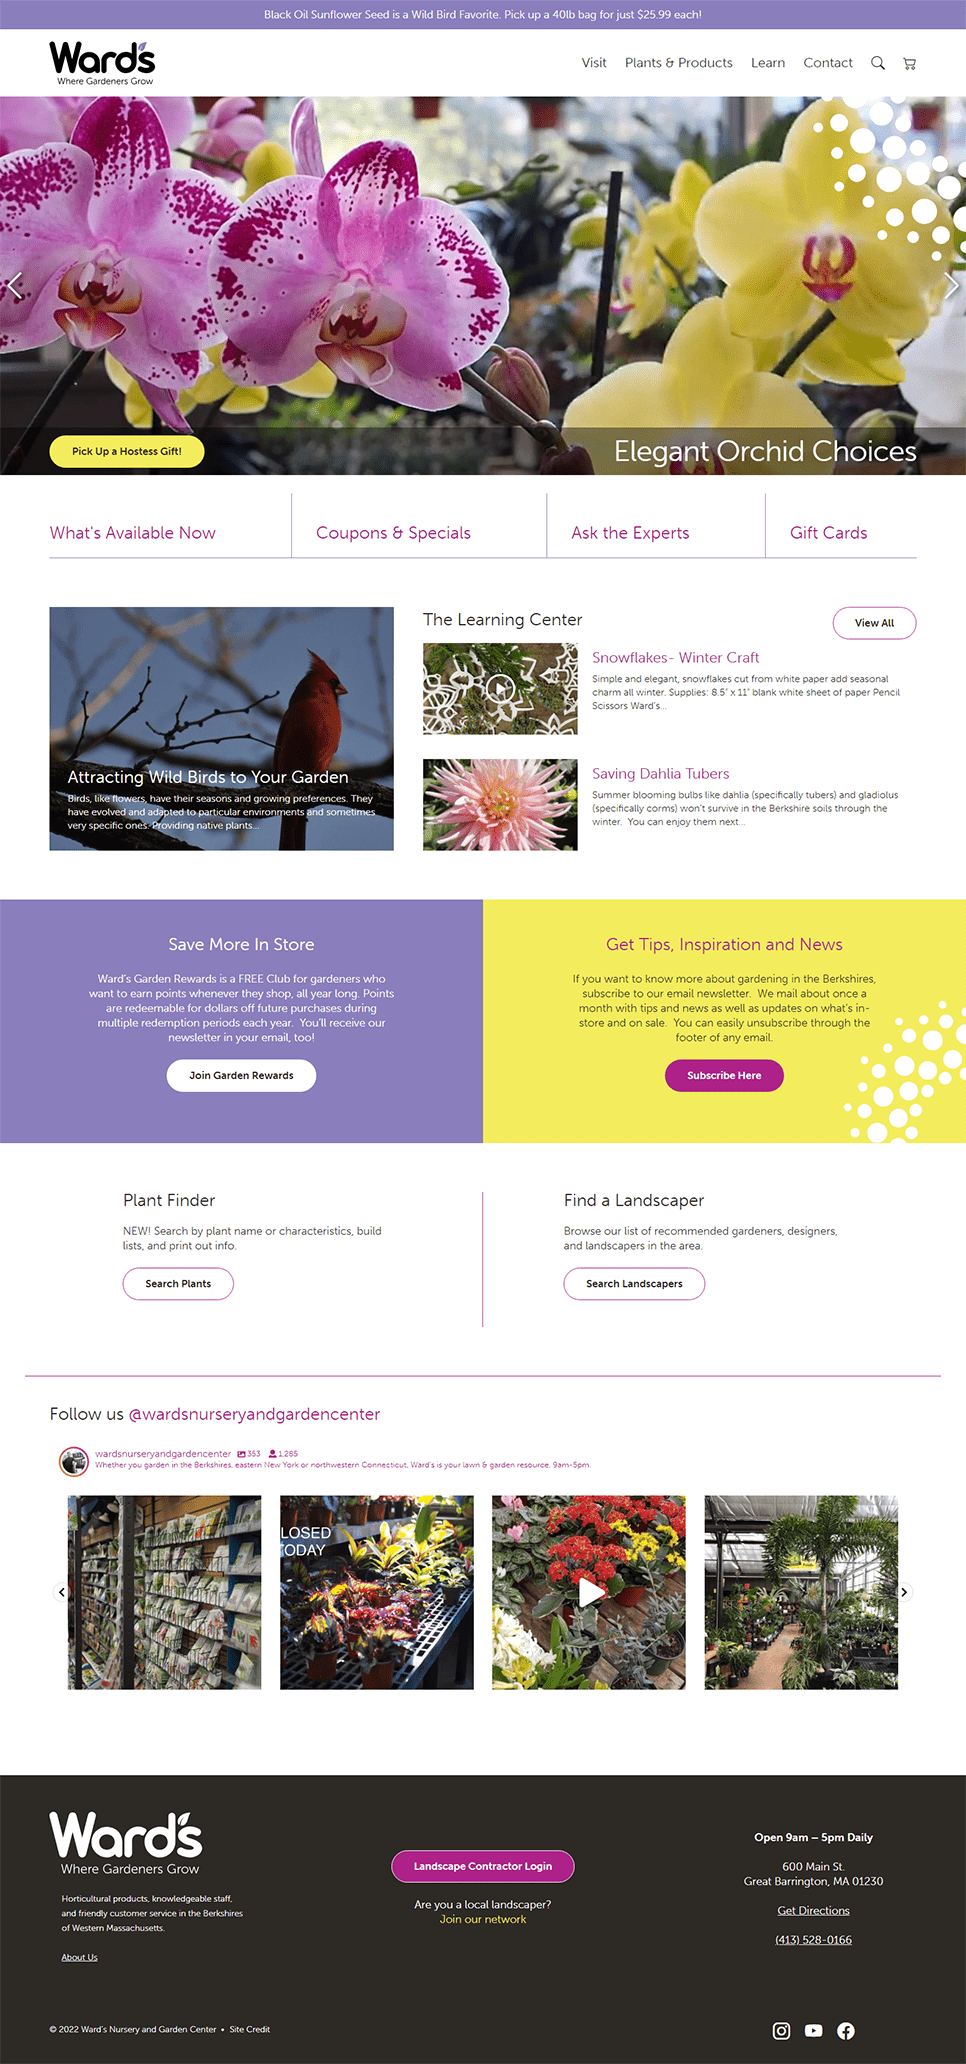 The completed website homepage for Ward's Nursery